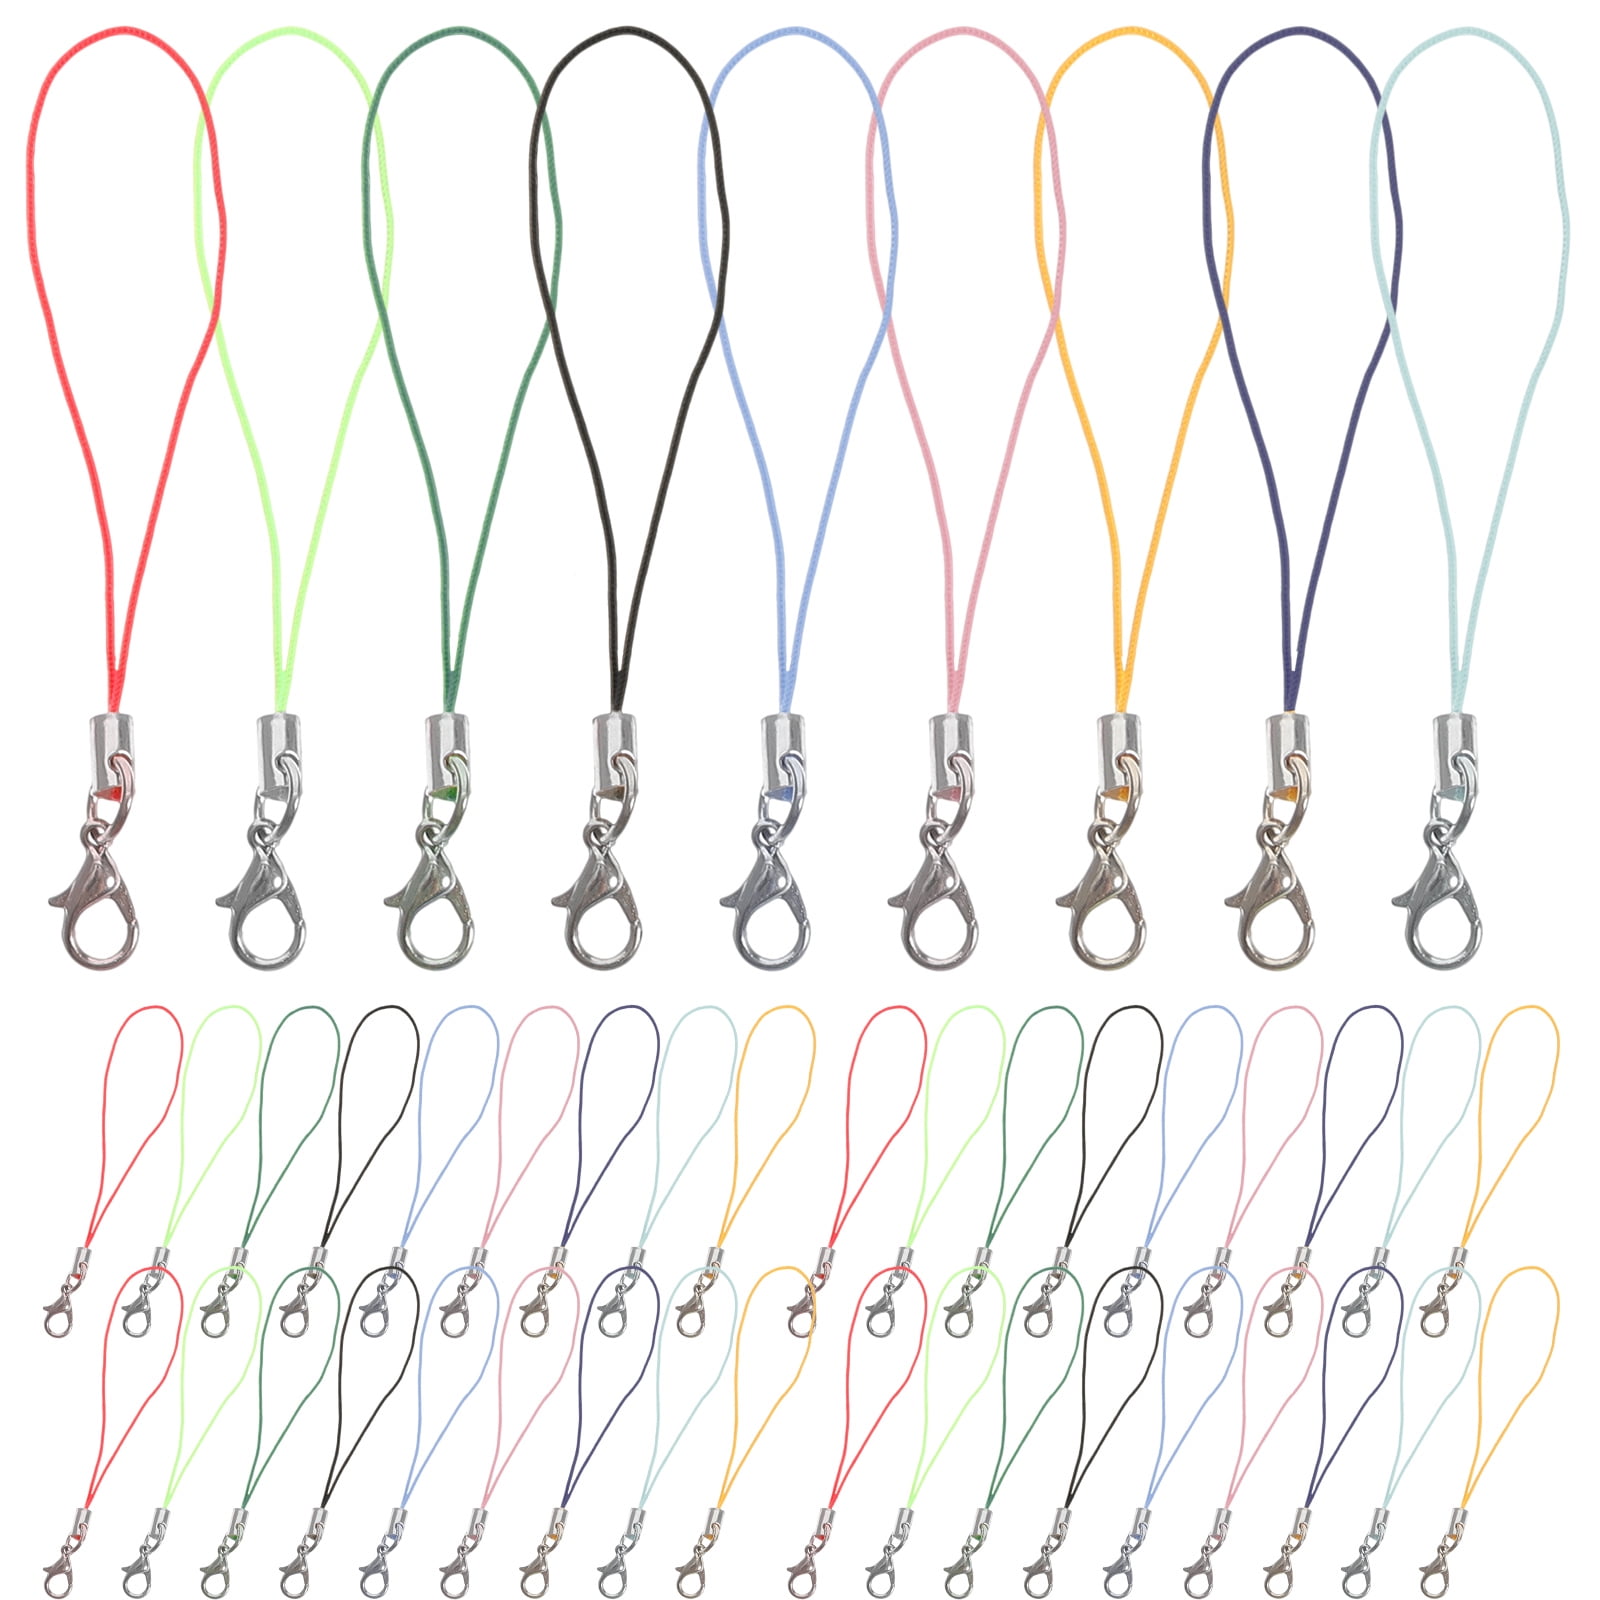 100pcs Cell Phone Charm Straps Lobster Clasp Lariat Cord Mobile Phone  Lanyards Key Chain DIY Accessories (Random Colors) 